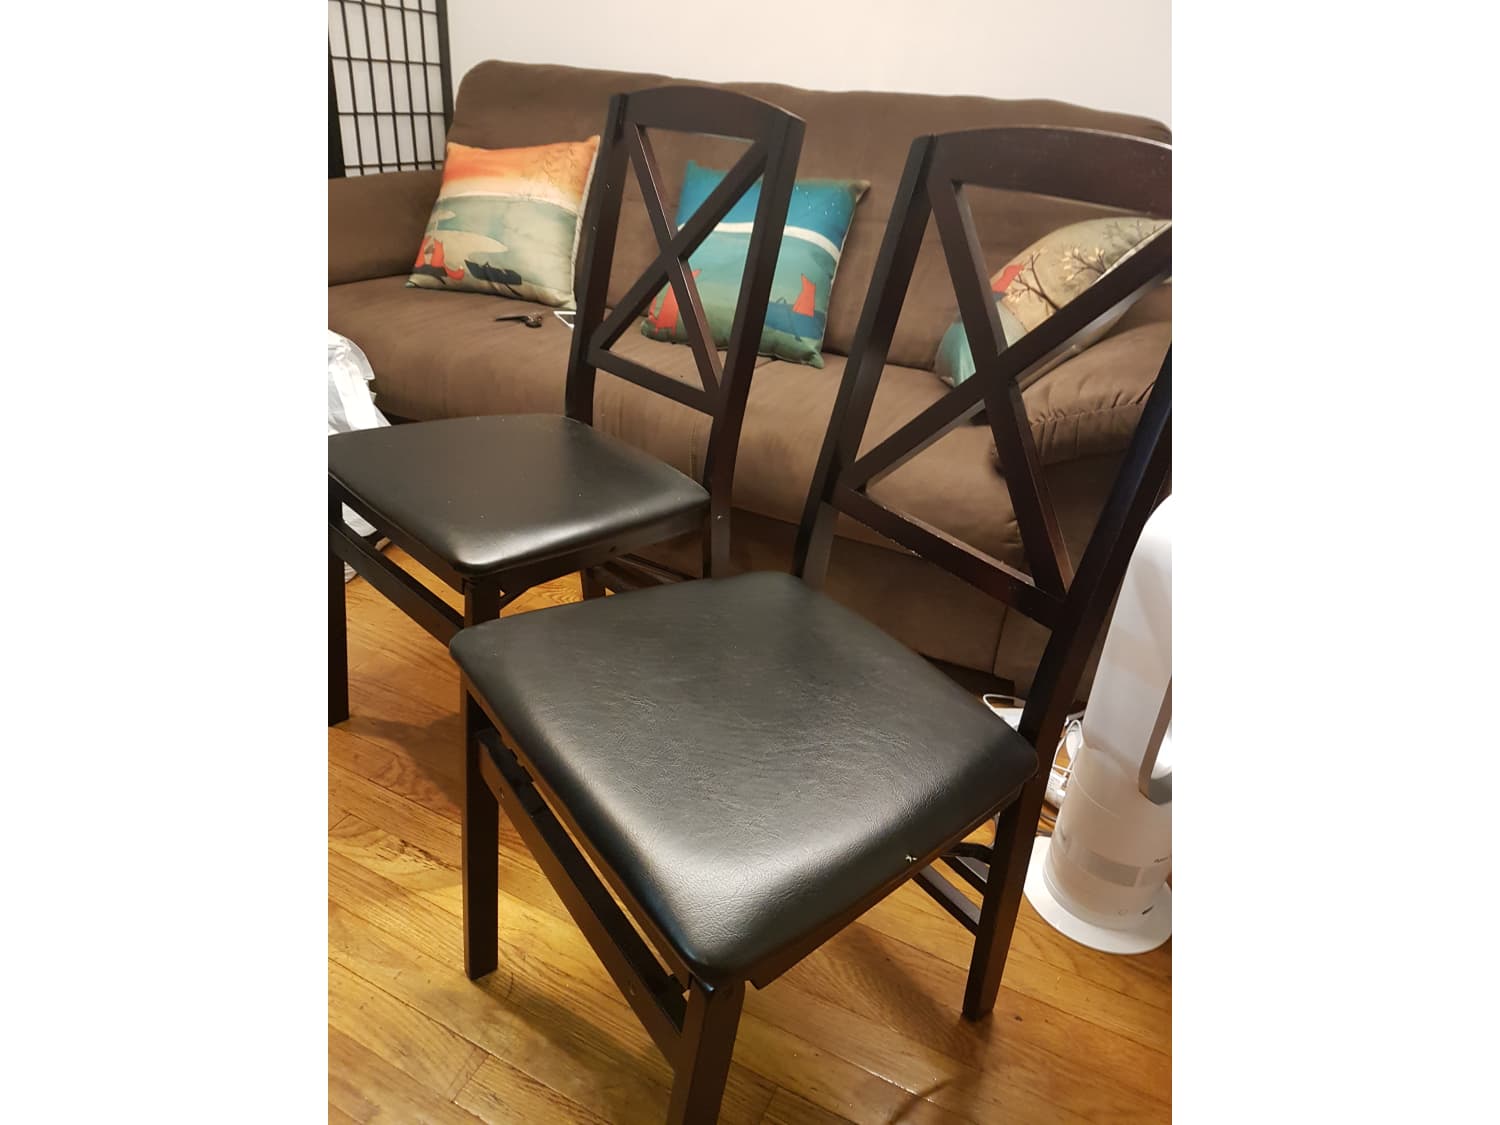 Pair of folding vinyl chairs - Apartment Therapy's Bazaar.